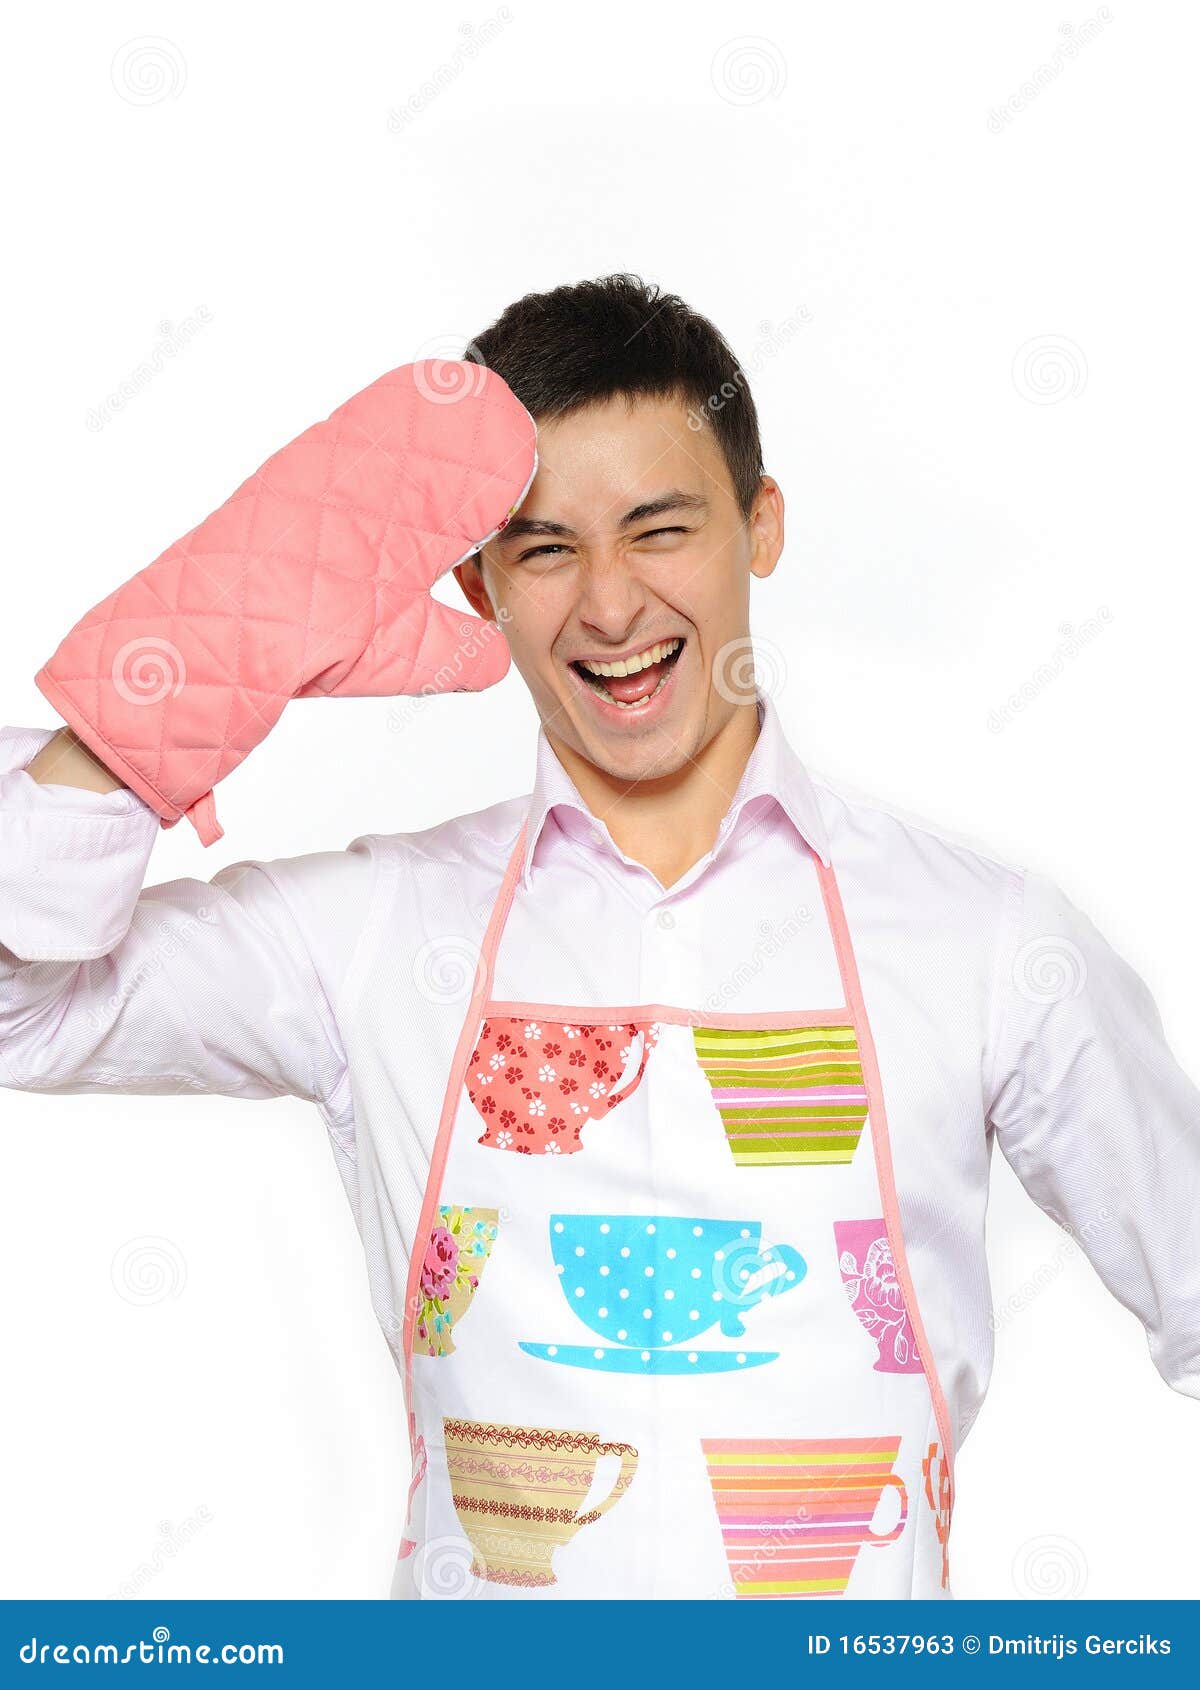 Young Happy Cook Man In Apron Smiling Stock Image Image Of Enjoyment Cuisine 16537963 